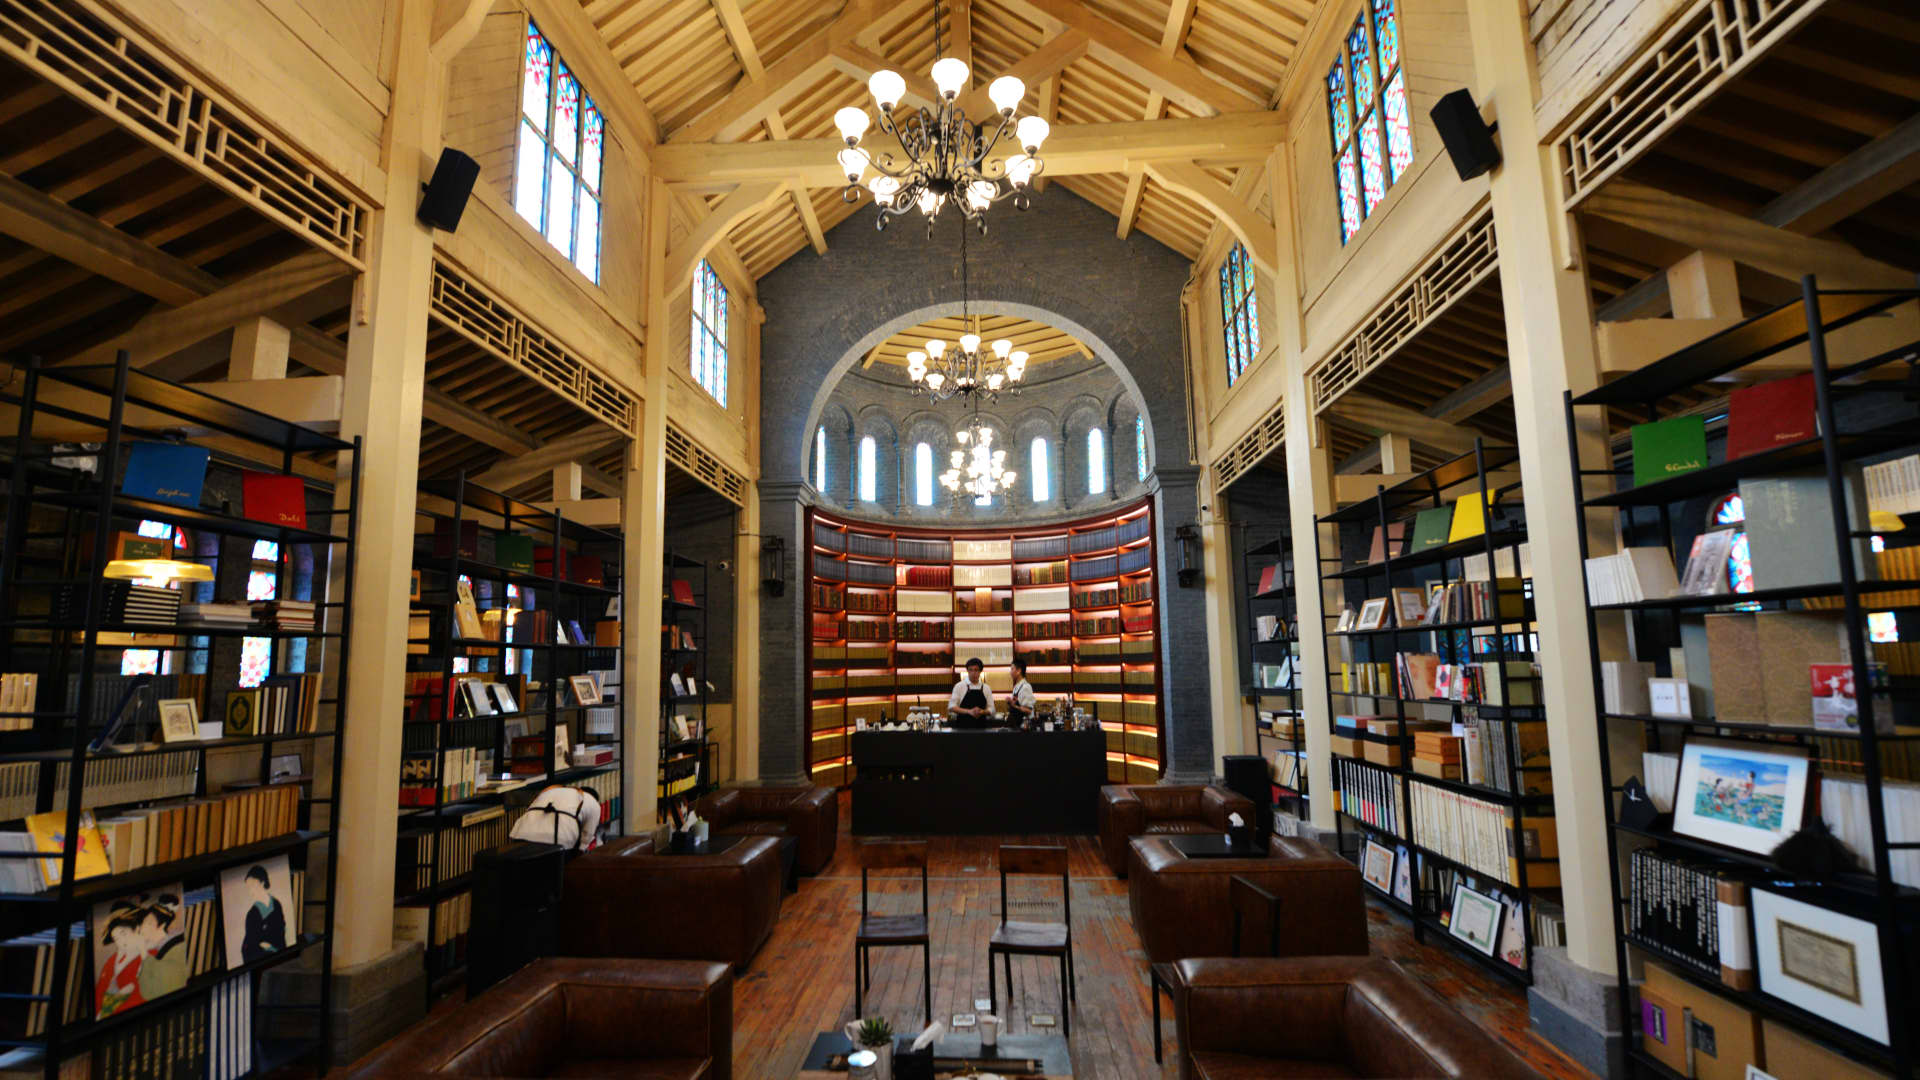 This building in Beijing, China, was built in 1907 as the first Anglican church in the city, but lost its religious functions long ago and was turned into a bookstore before this photo was taken on June 21, 2019.